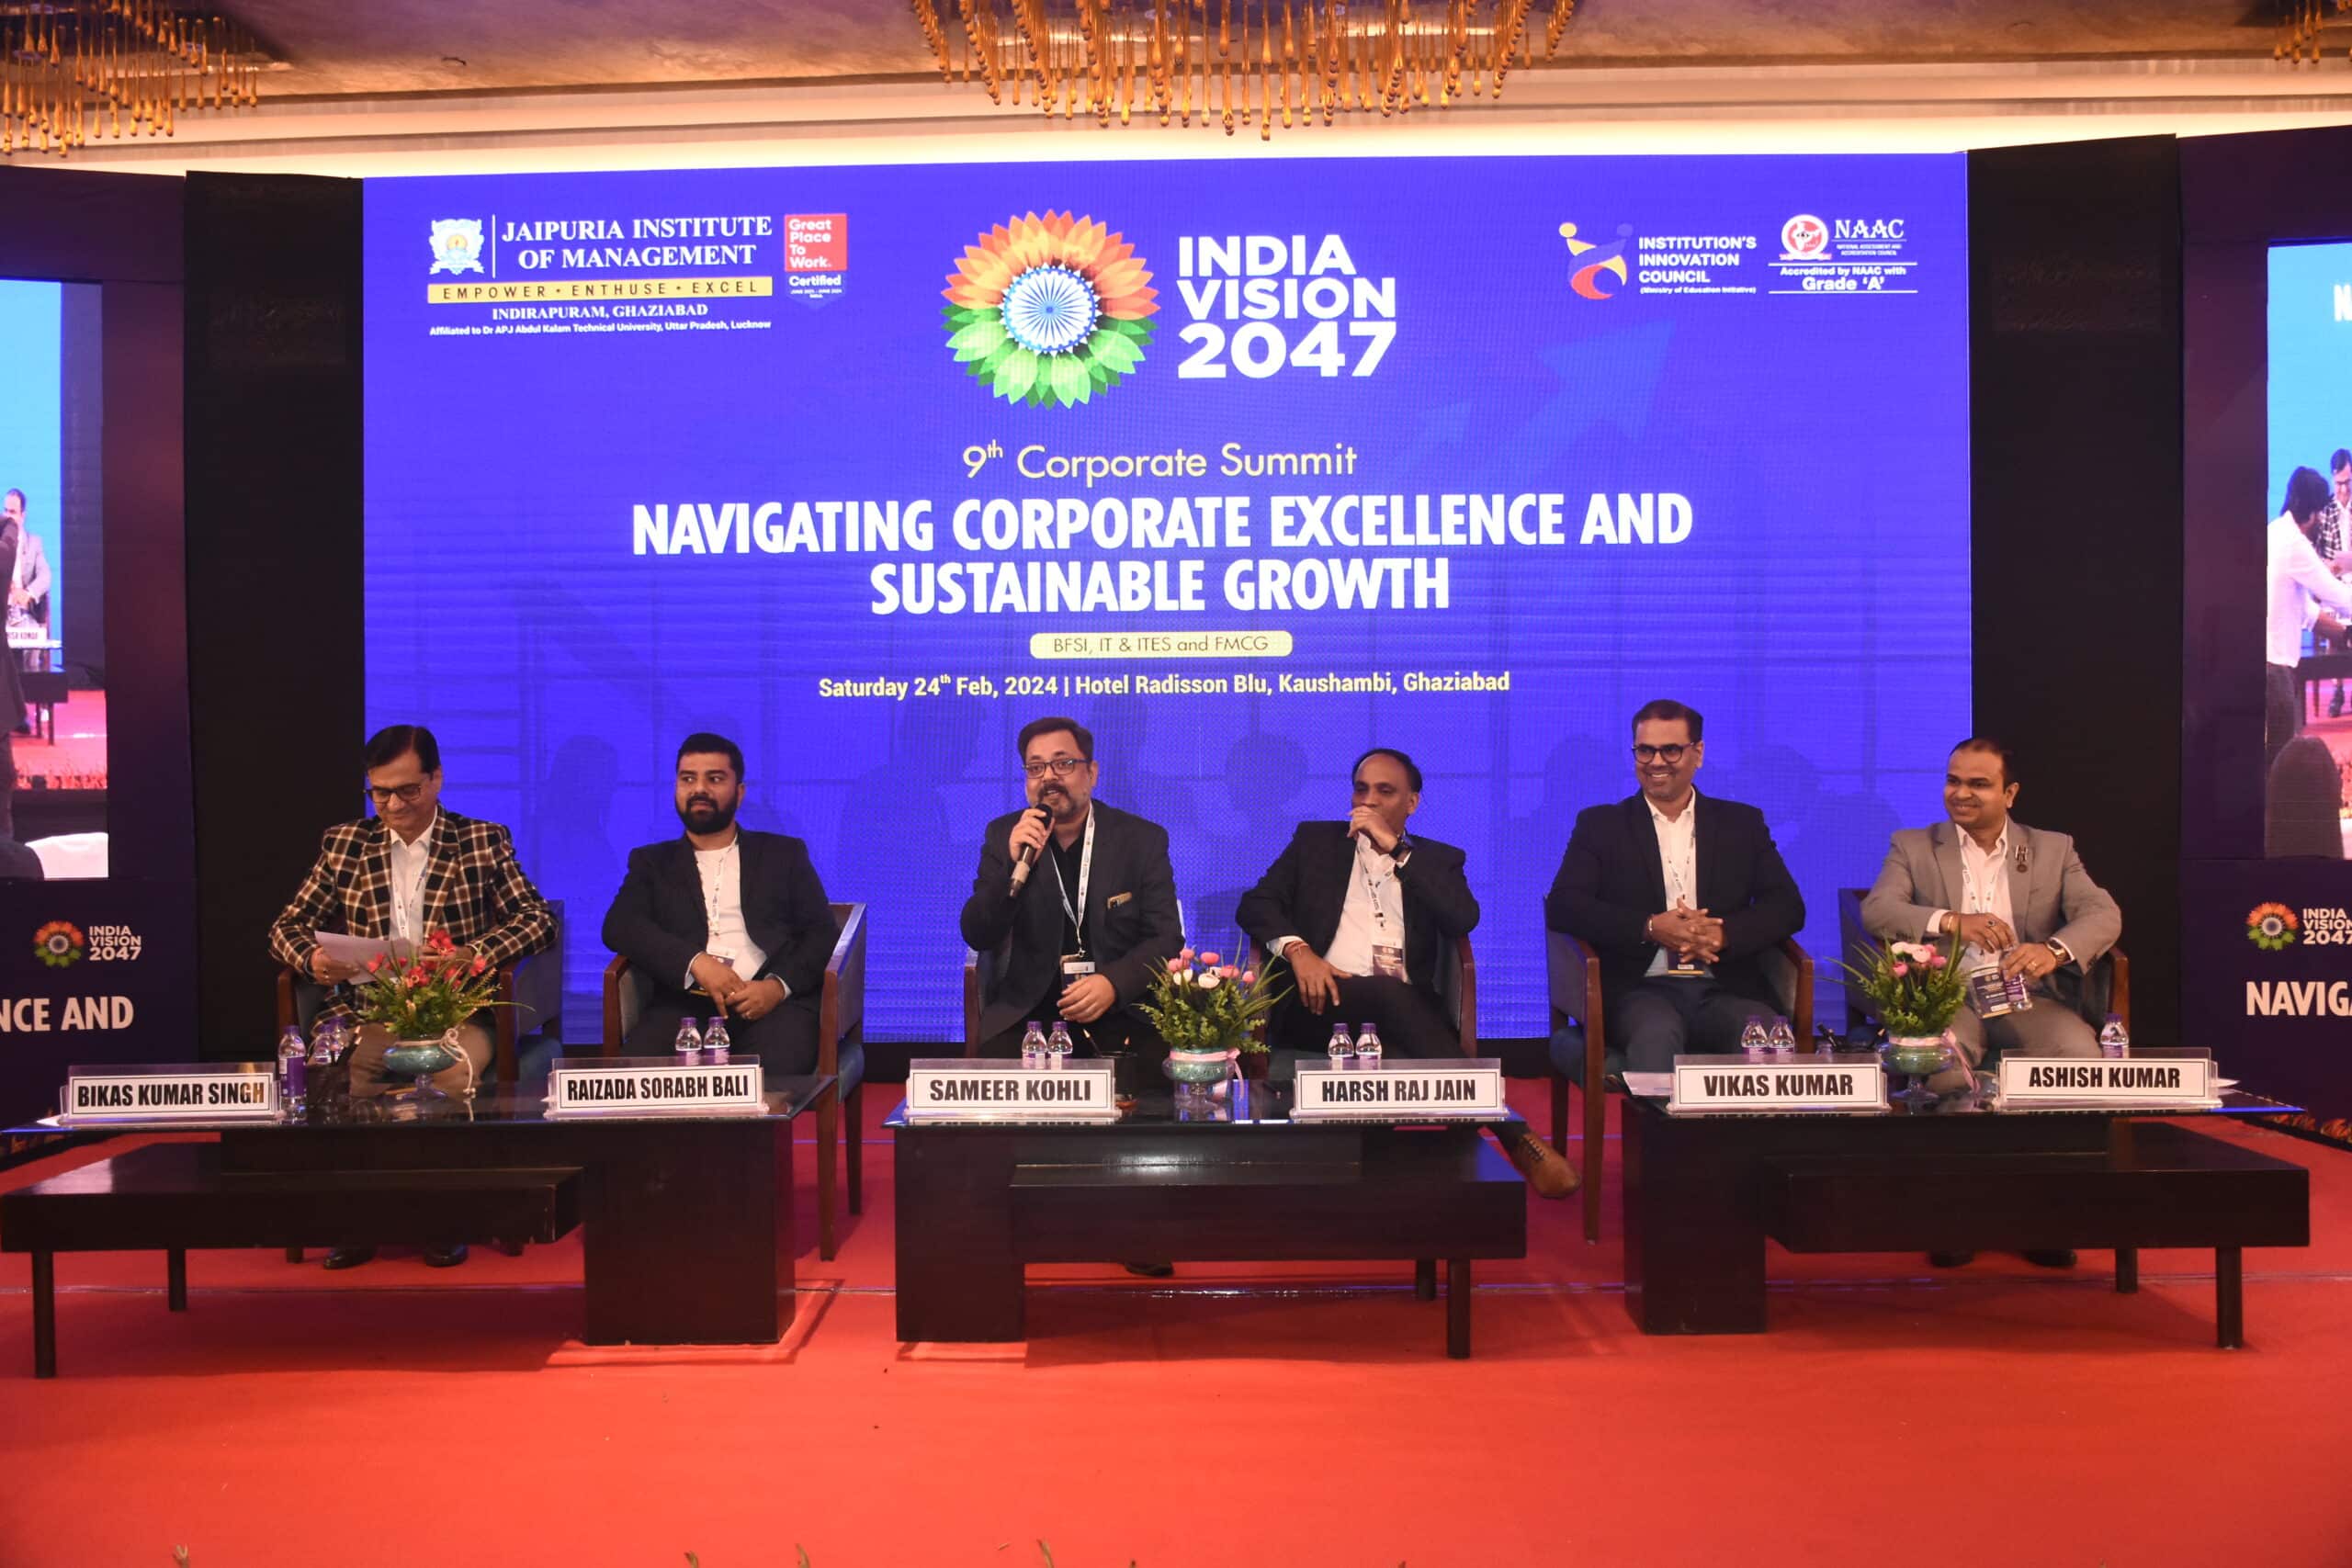 Panel discussion at the 9th Corporate Summit; Visionaries shaping India's IT/ITES sector; Technology for inclusive growth.